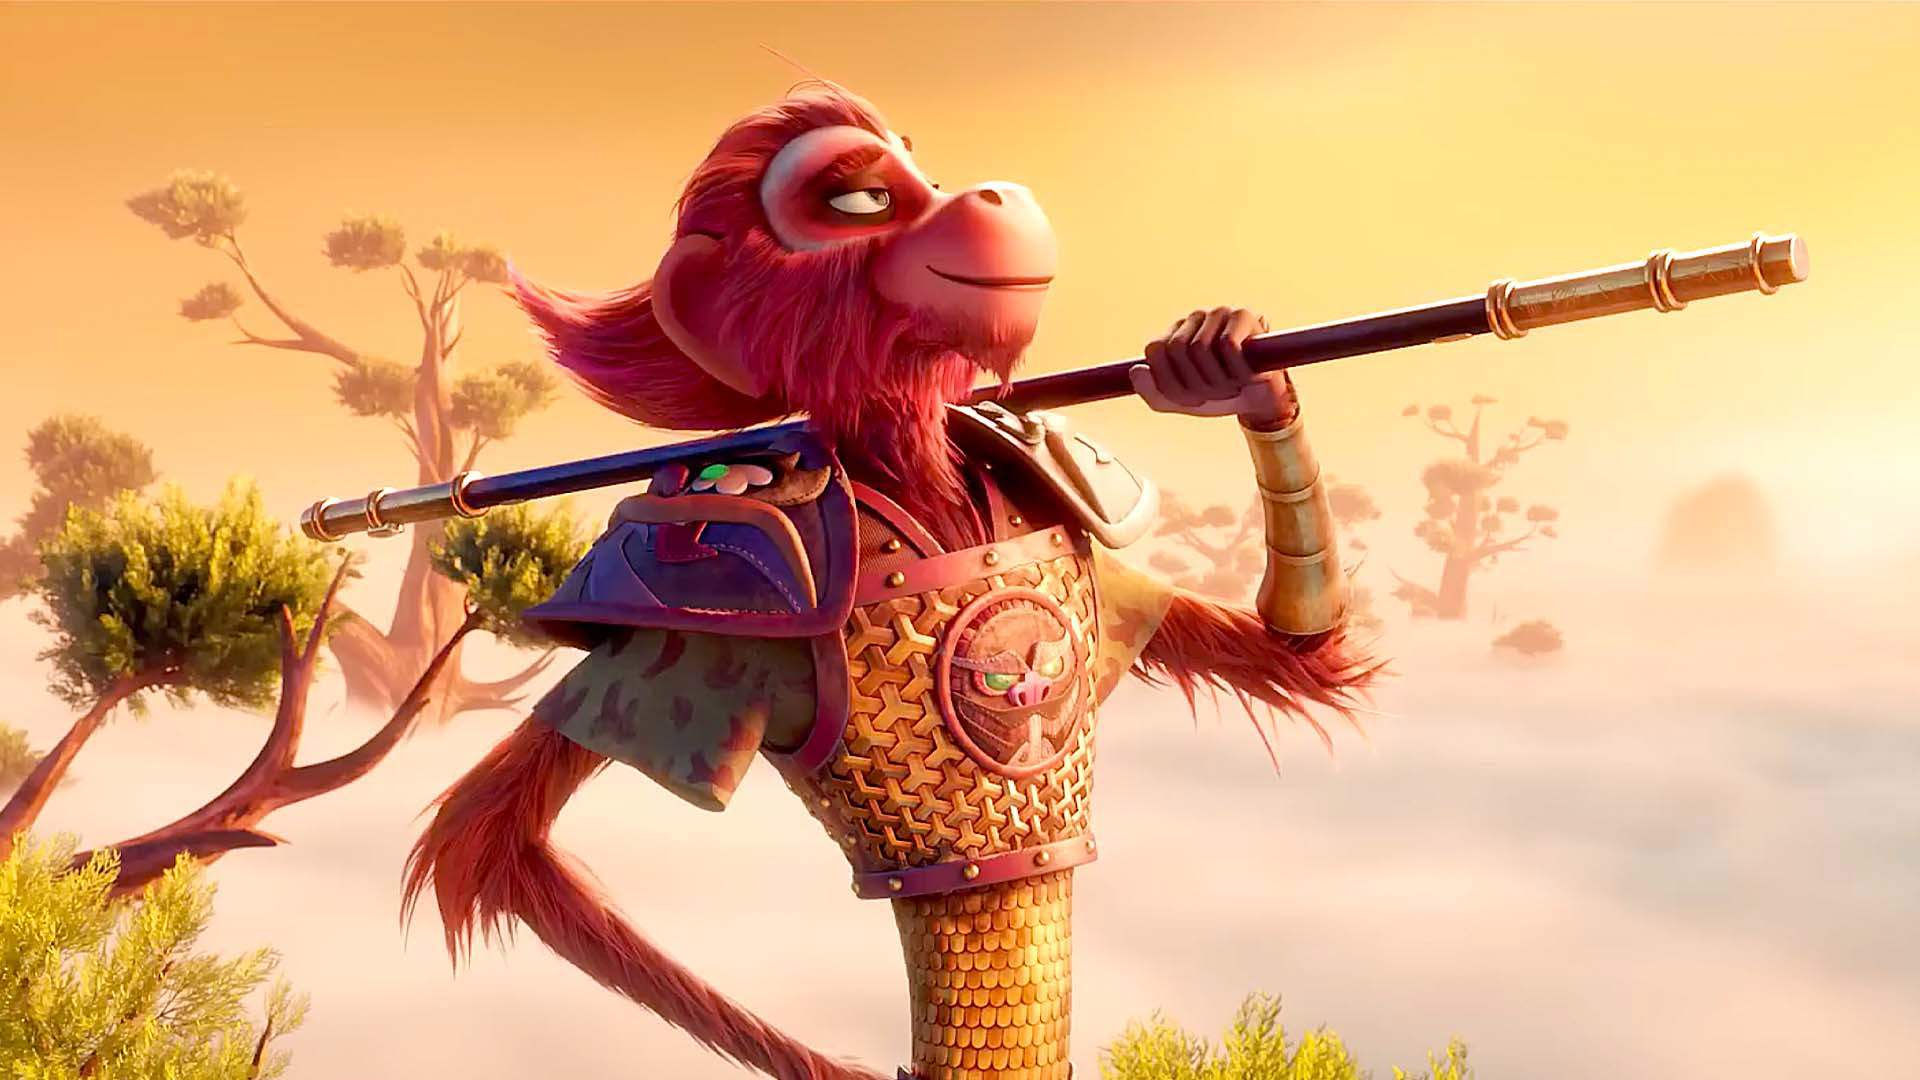 Official Trailer for Netflix's The Monkey King